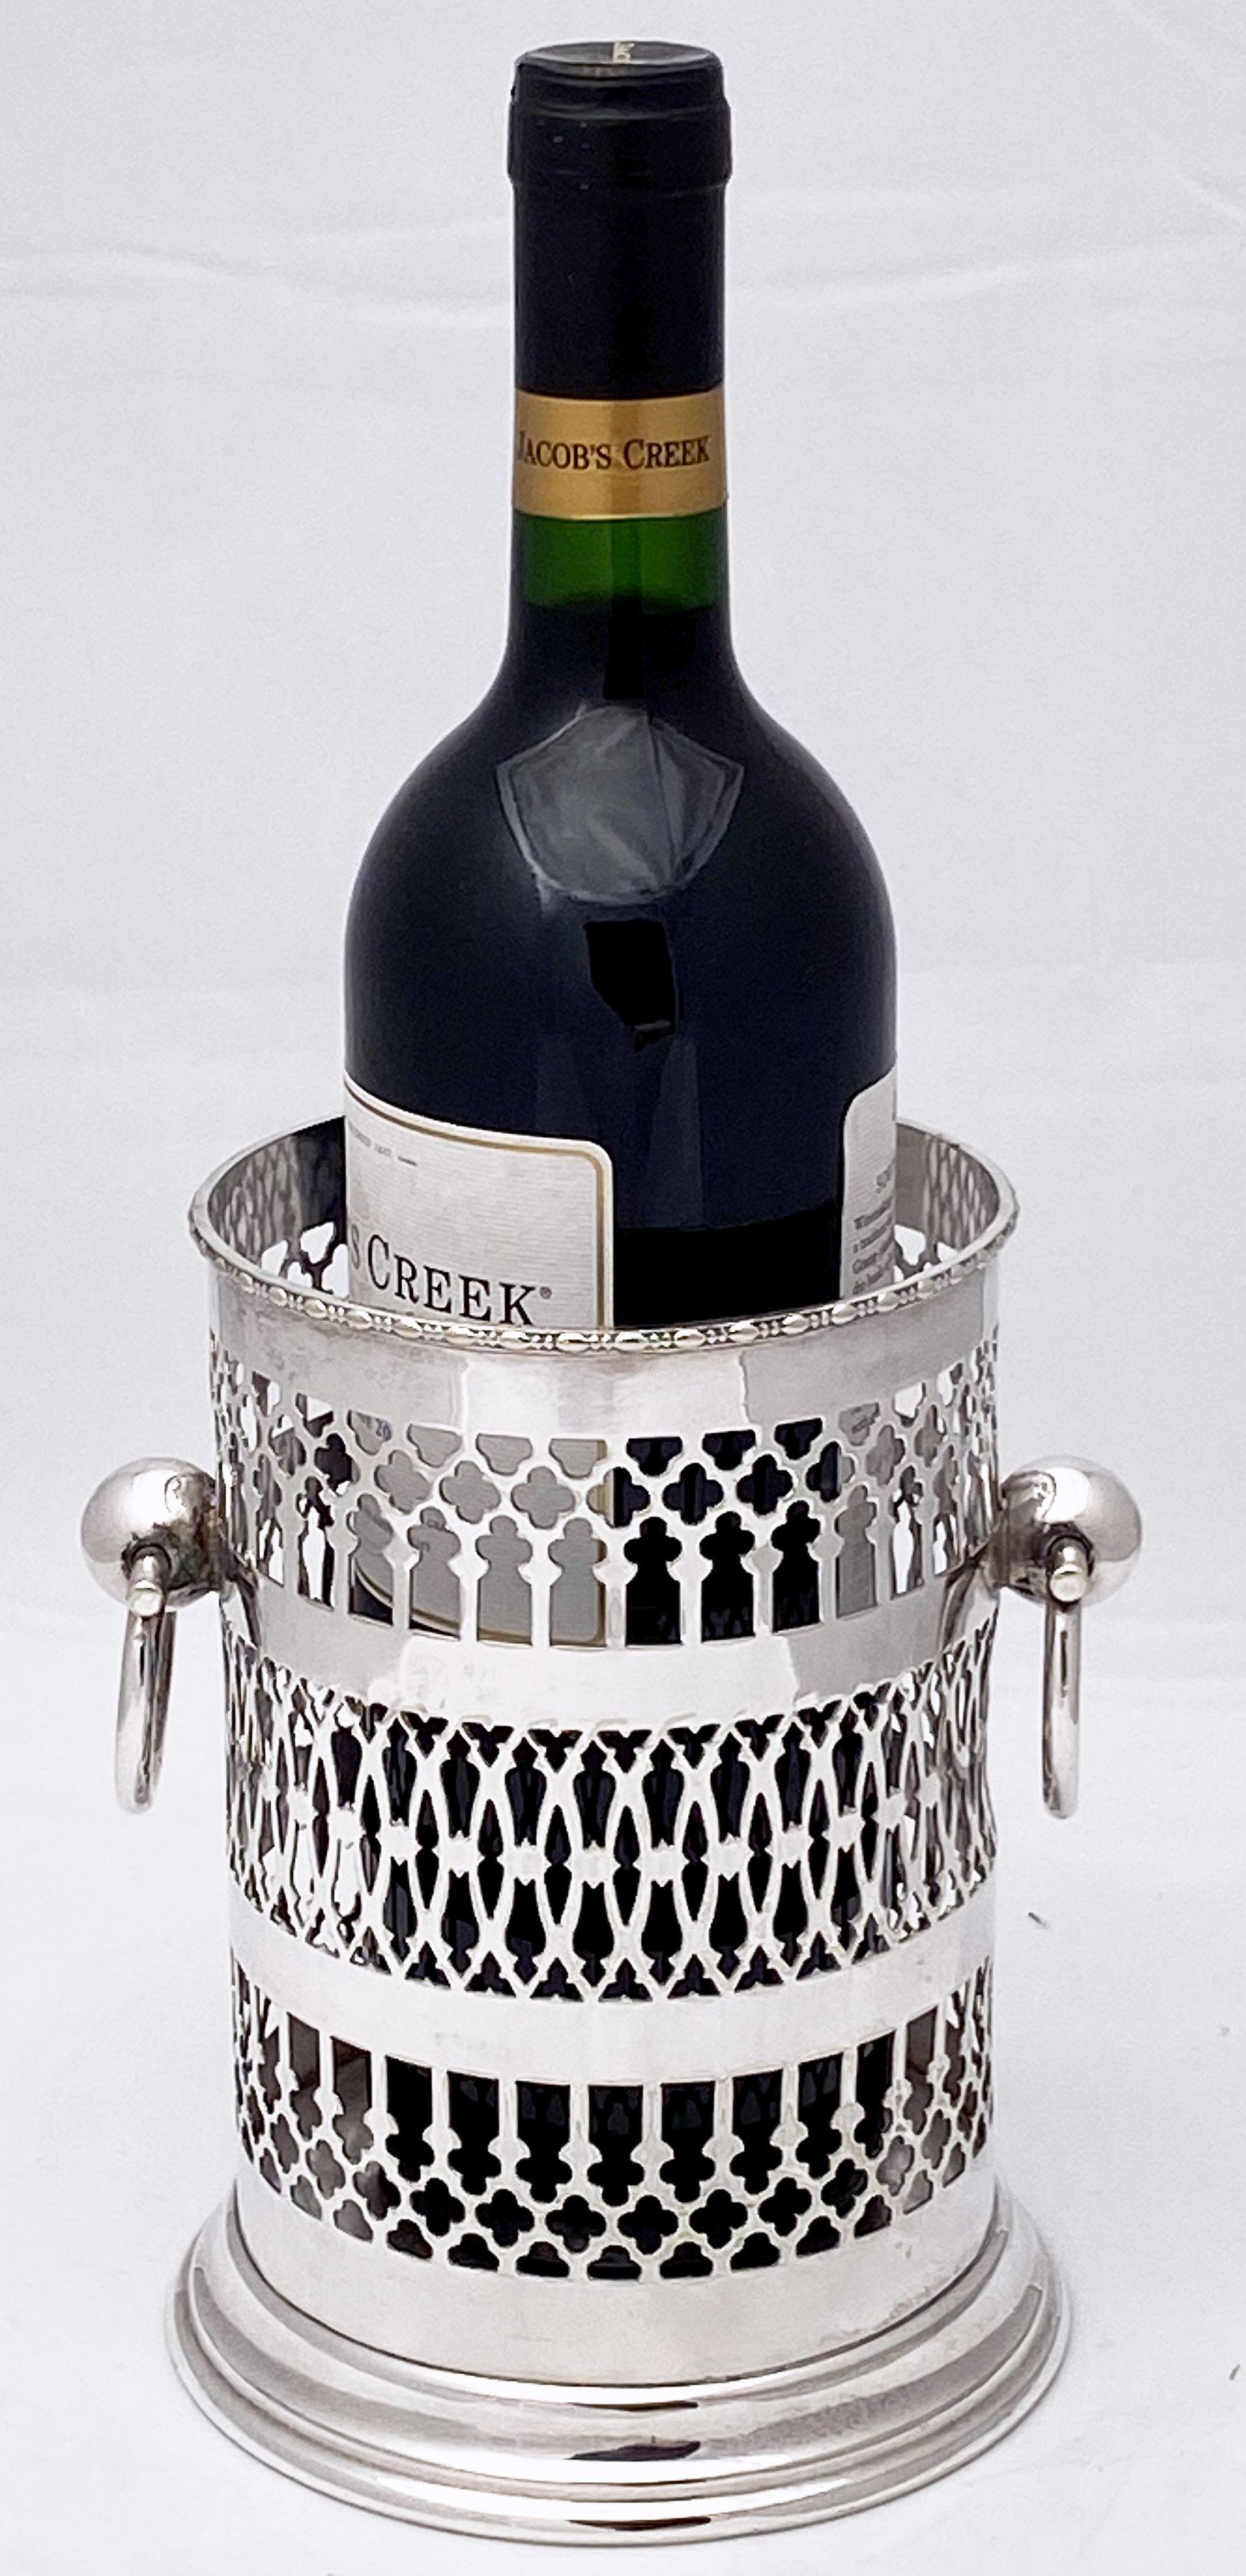 A handsome English wine bottle display holder or coaster of fine plate silver, featuring a rolled edge around the top, with an elegant pierced design around the circumference and opposing ring handles, and raised cylindrical base.

Measure: Rim